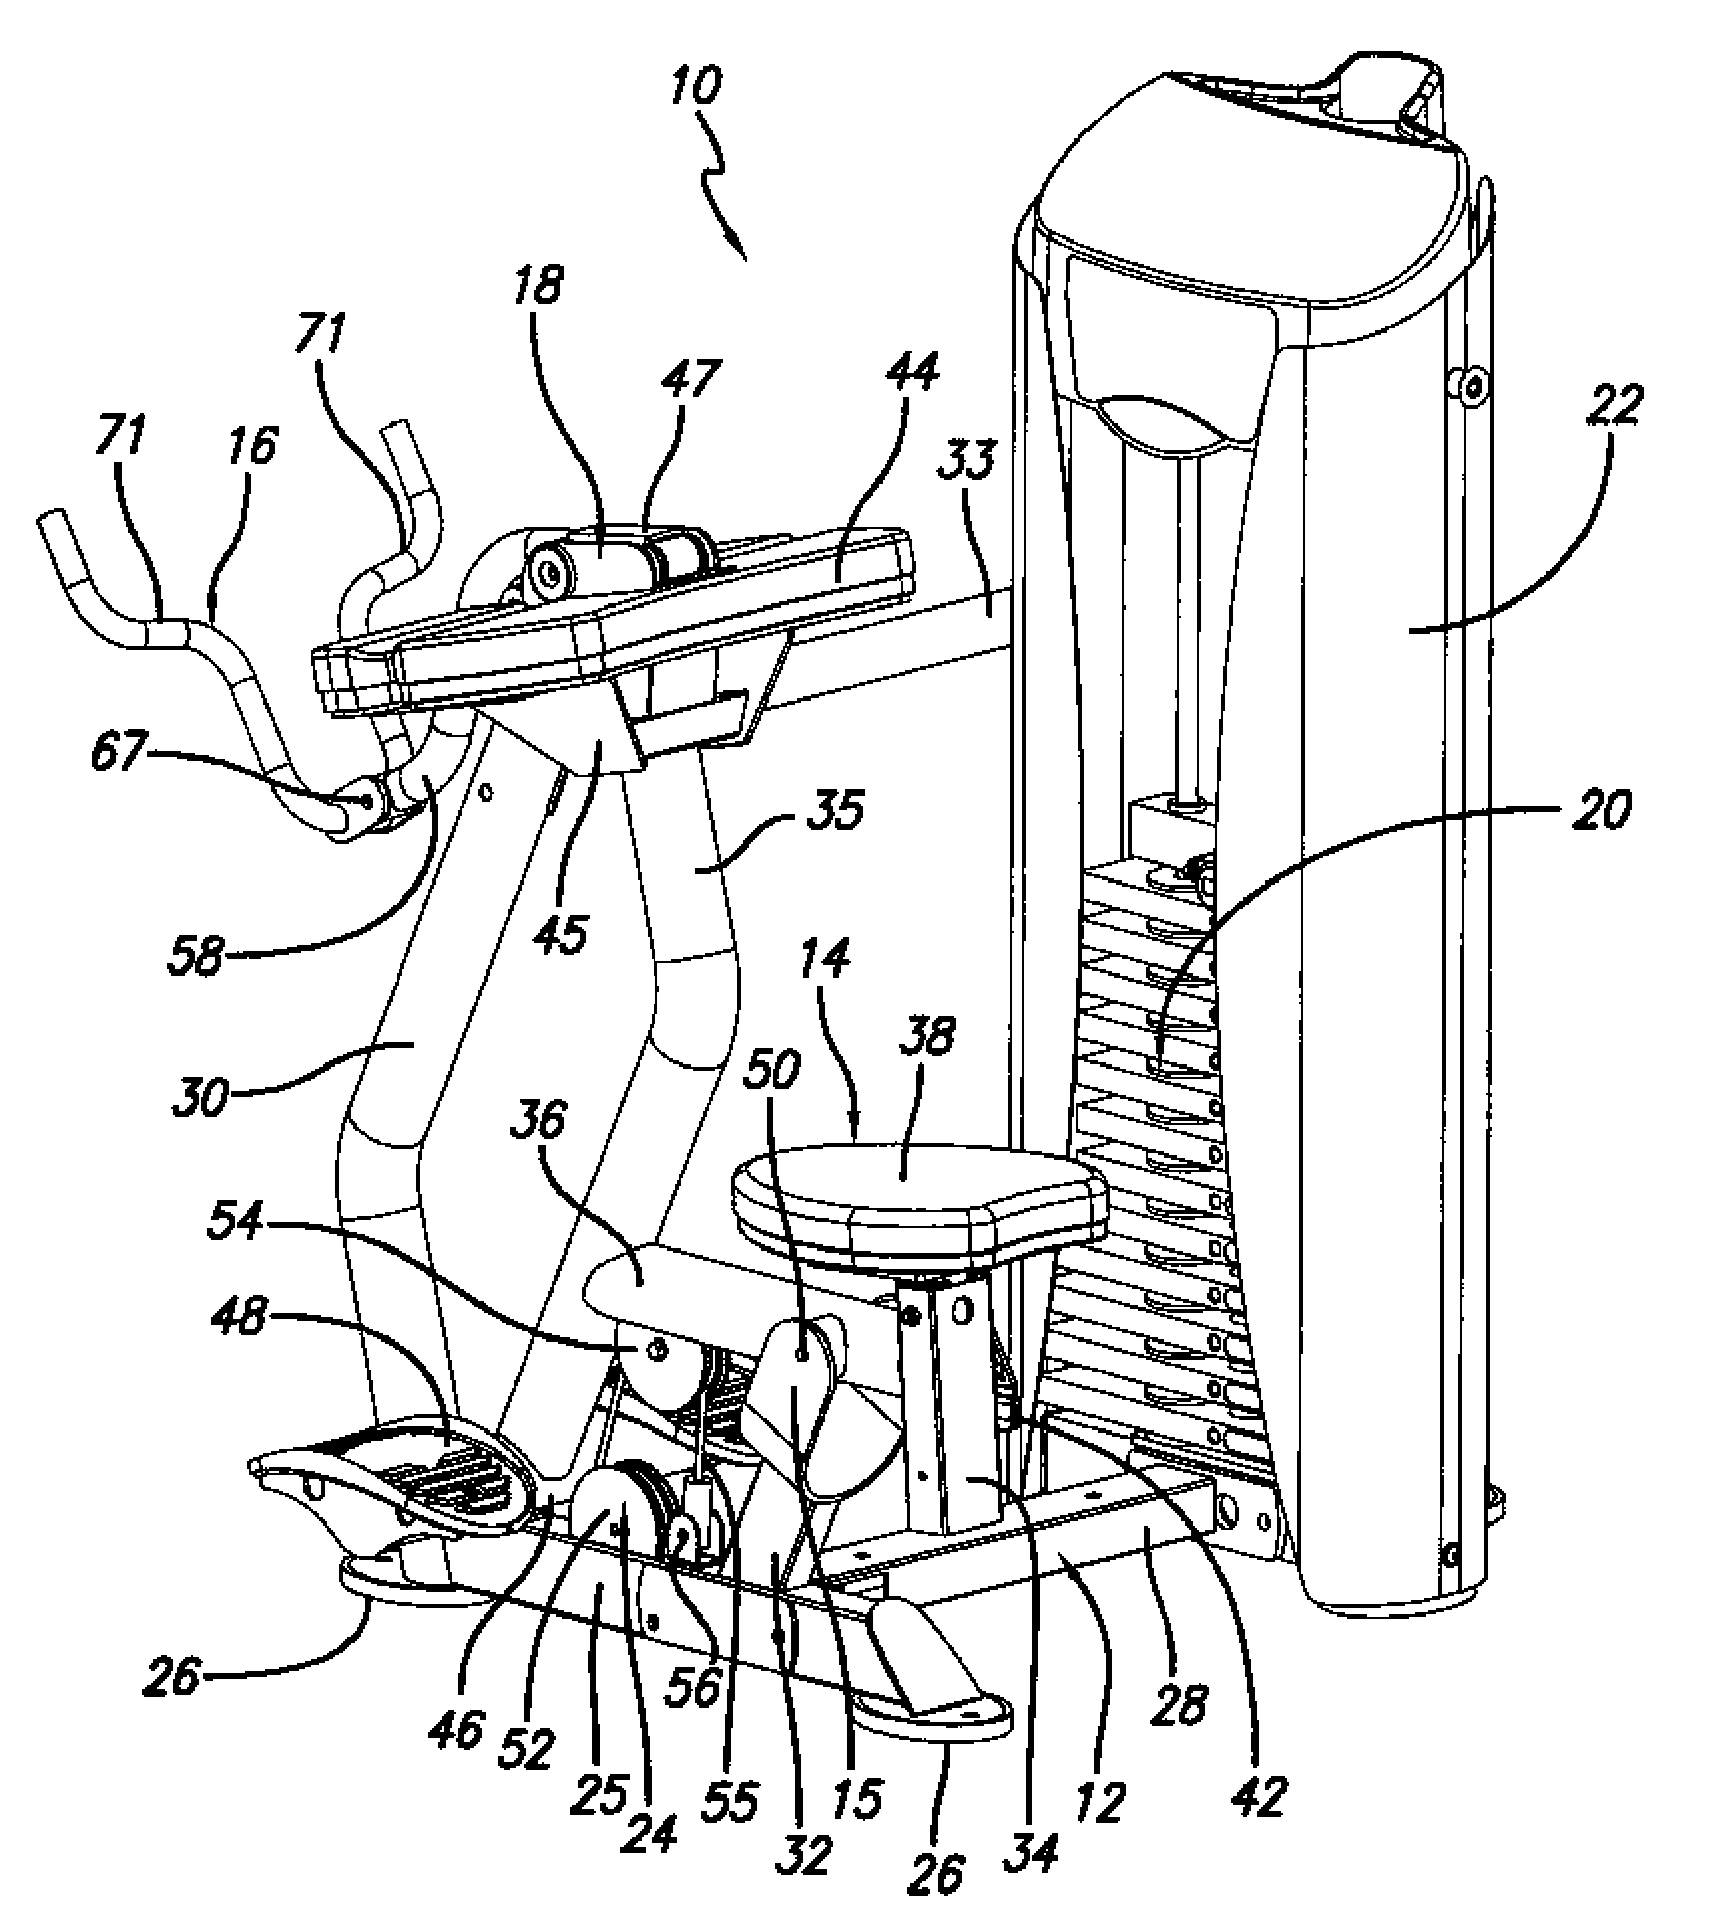 Arm Exercise Machine With Self-Aligning Pivoting User Support